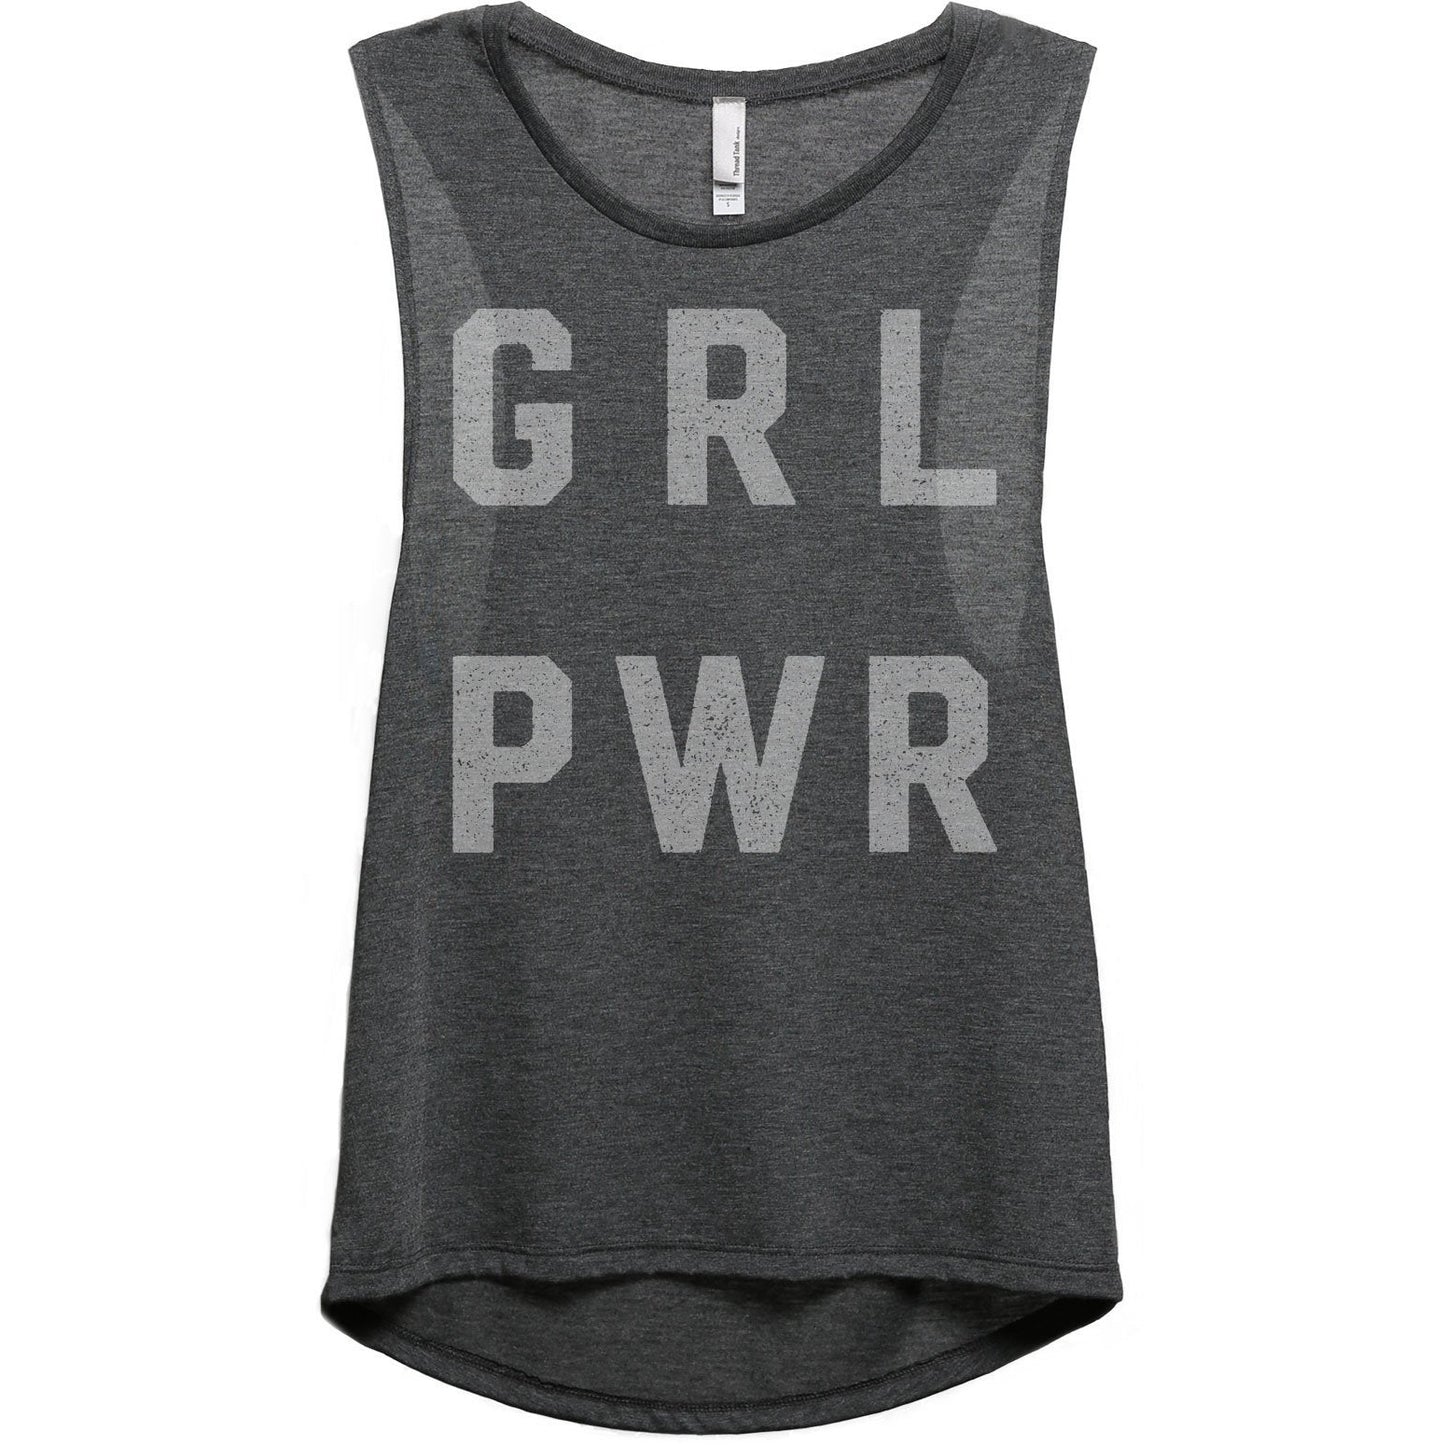 GRL PWR Girl Power Women's Relaxed Muscle Tank Tee Charcoal